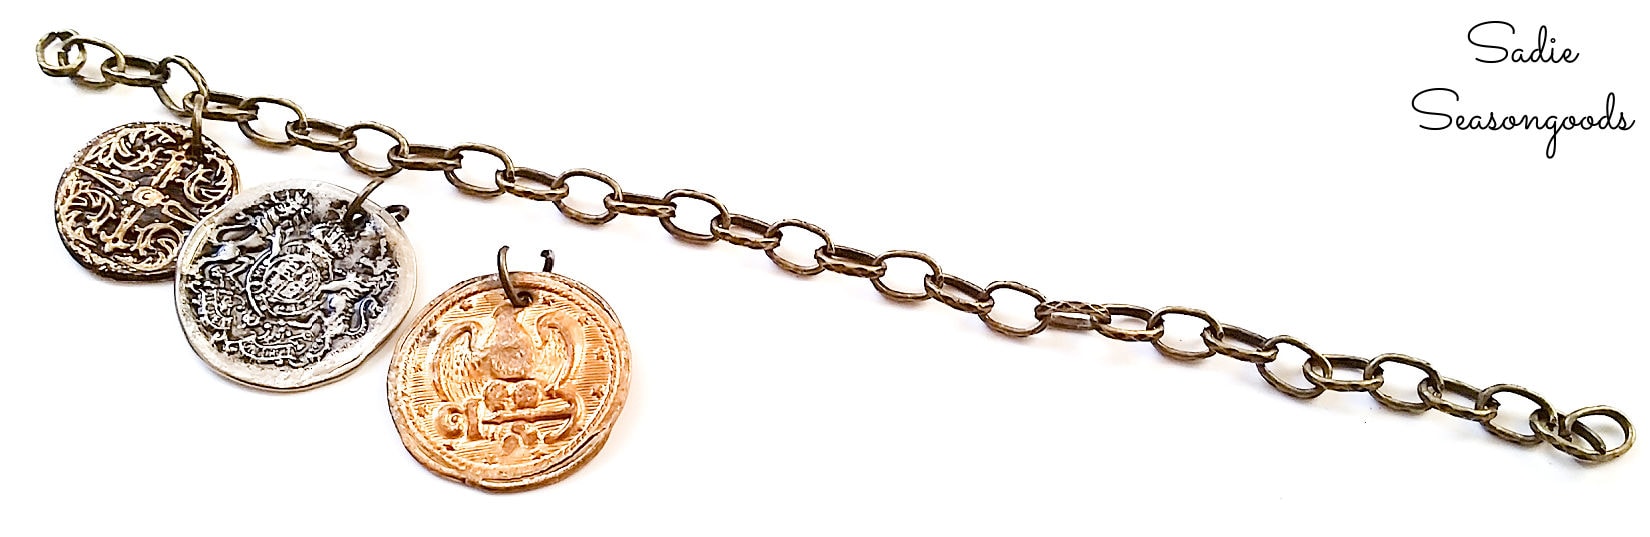 making a coin bracelet from vintage metal buttons